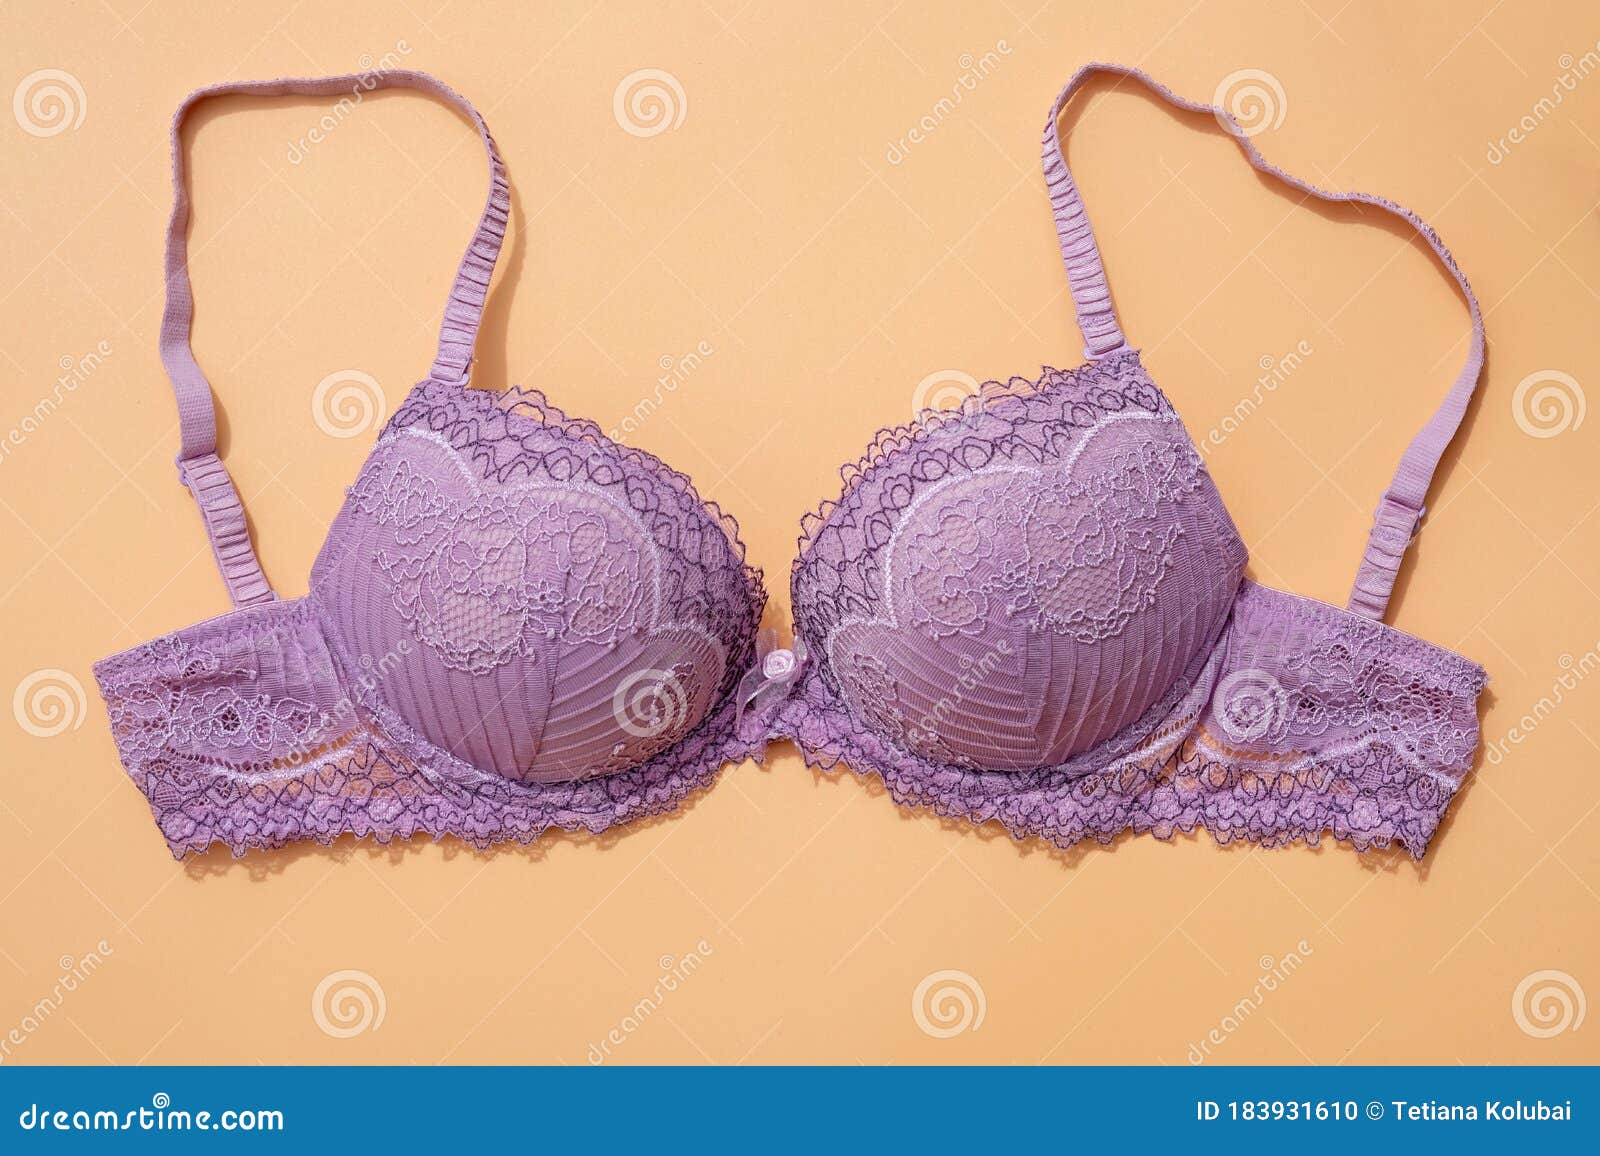 https://thumbs.dreamstime.com/z/lilac-bra-removable-straps-beige-background-top-view-sexy-bra-push-up-lace-underwear-women-lilac-bra-183931610.jpg